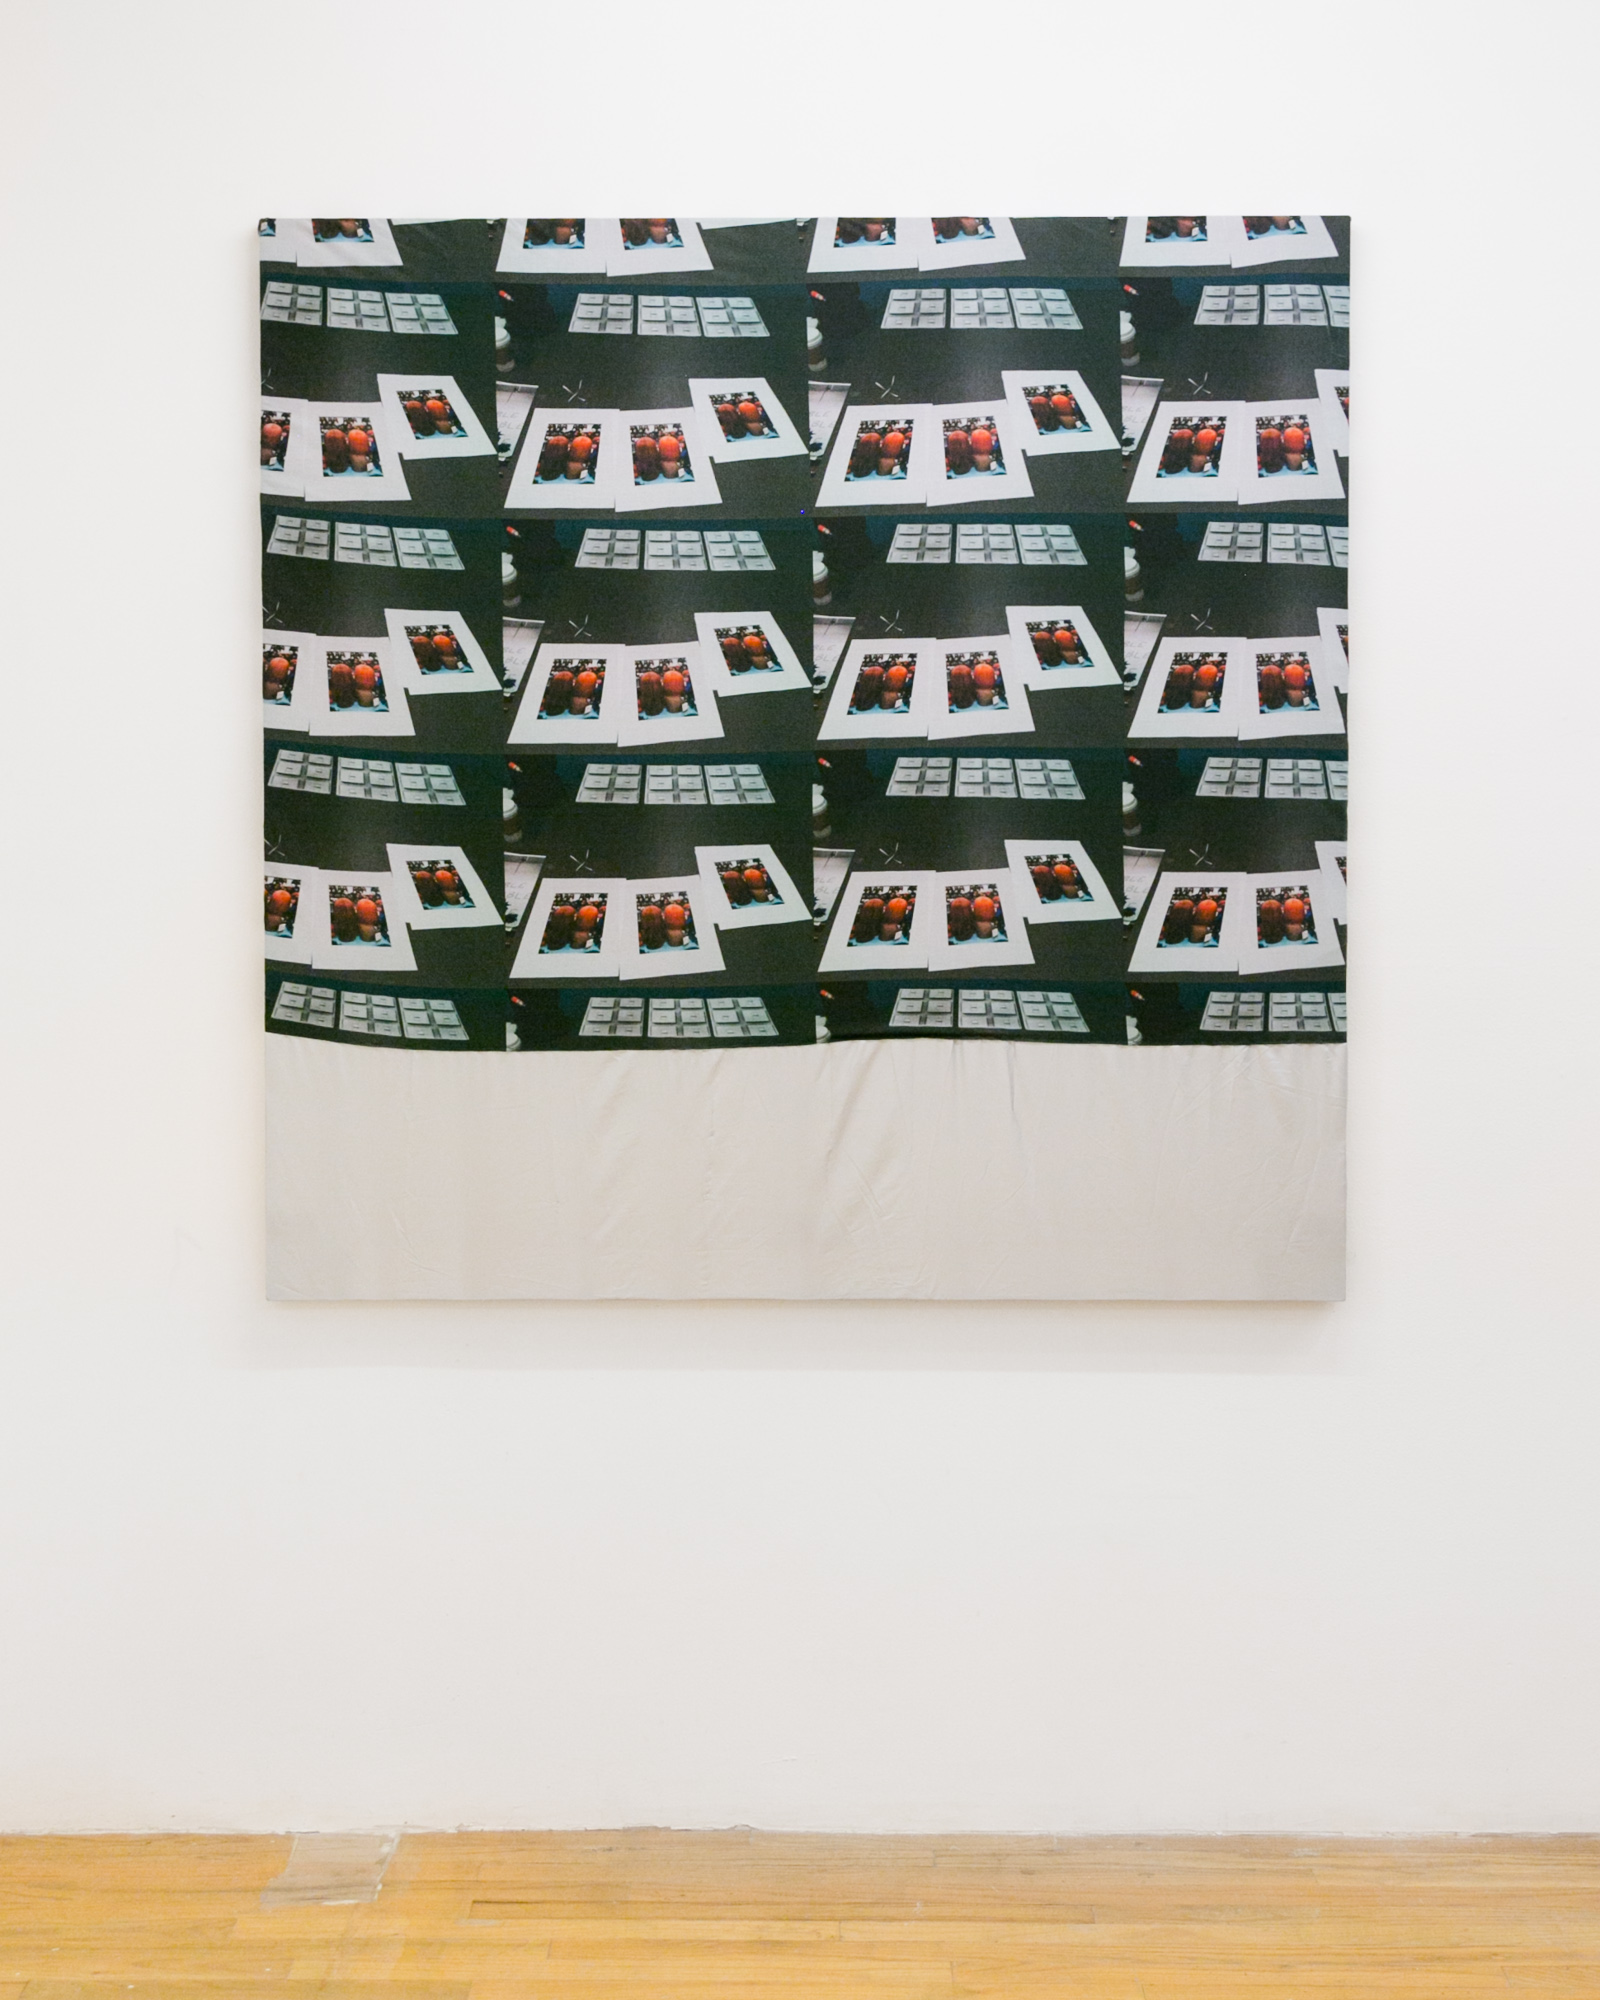  Laura Hunt,  Untitled , 2018, custom printed cotton and altered motorcycle cover with hand-sewing, 48 x 48 inches. 